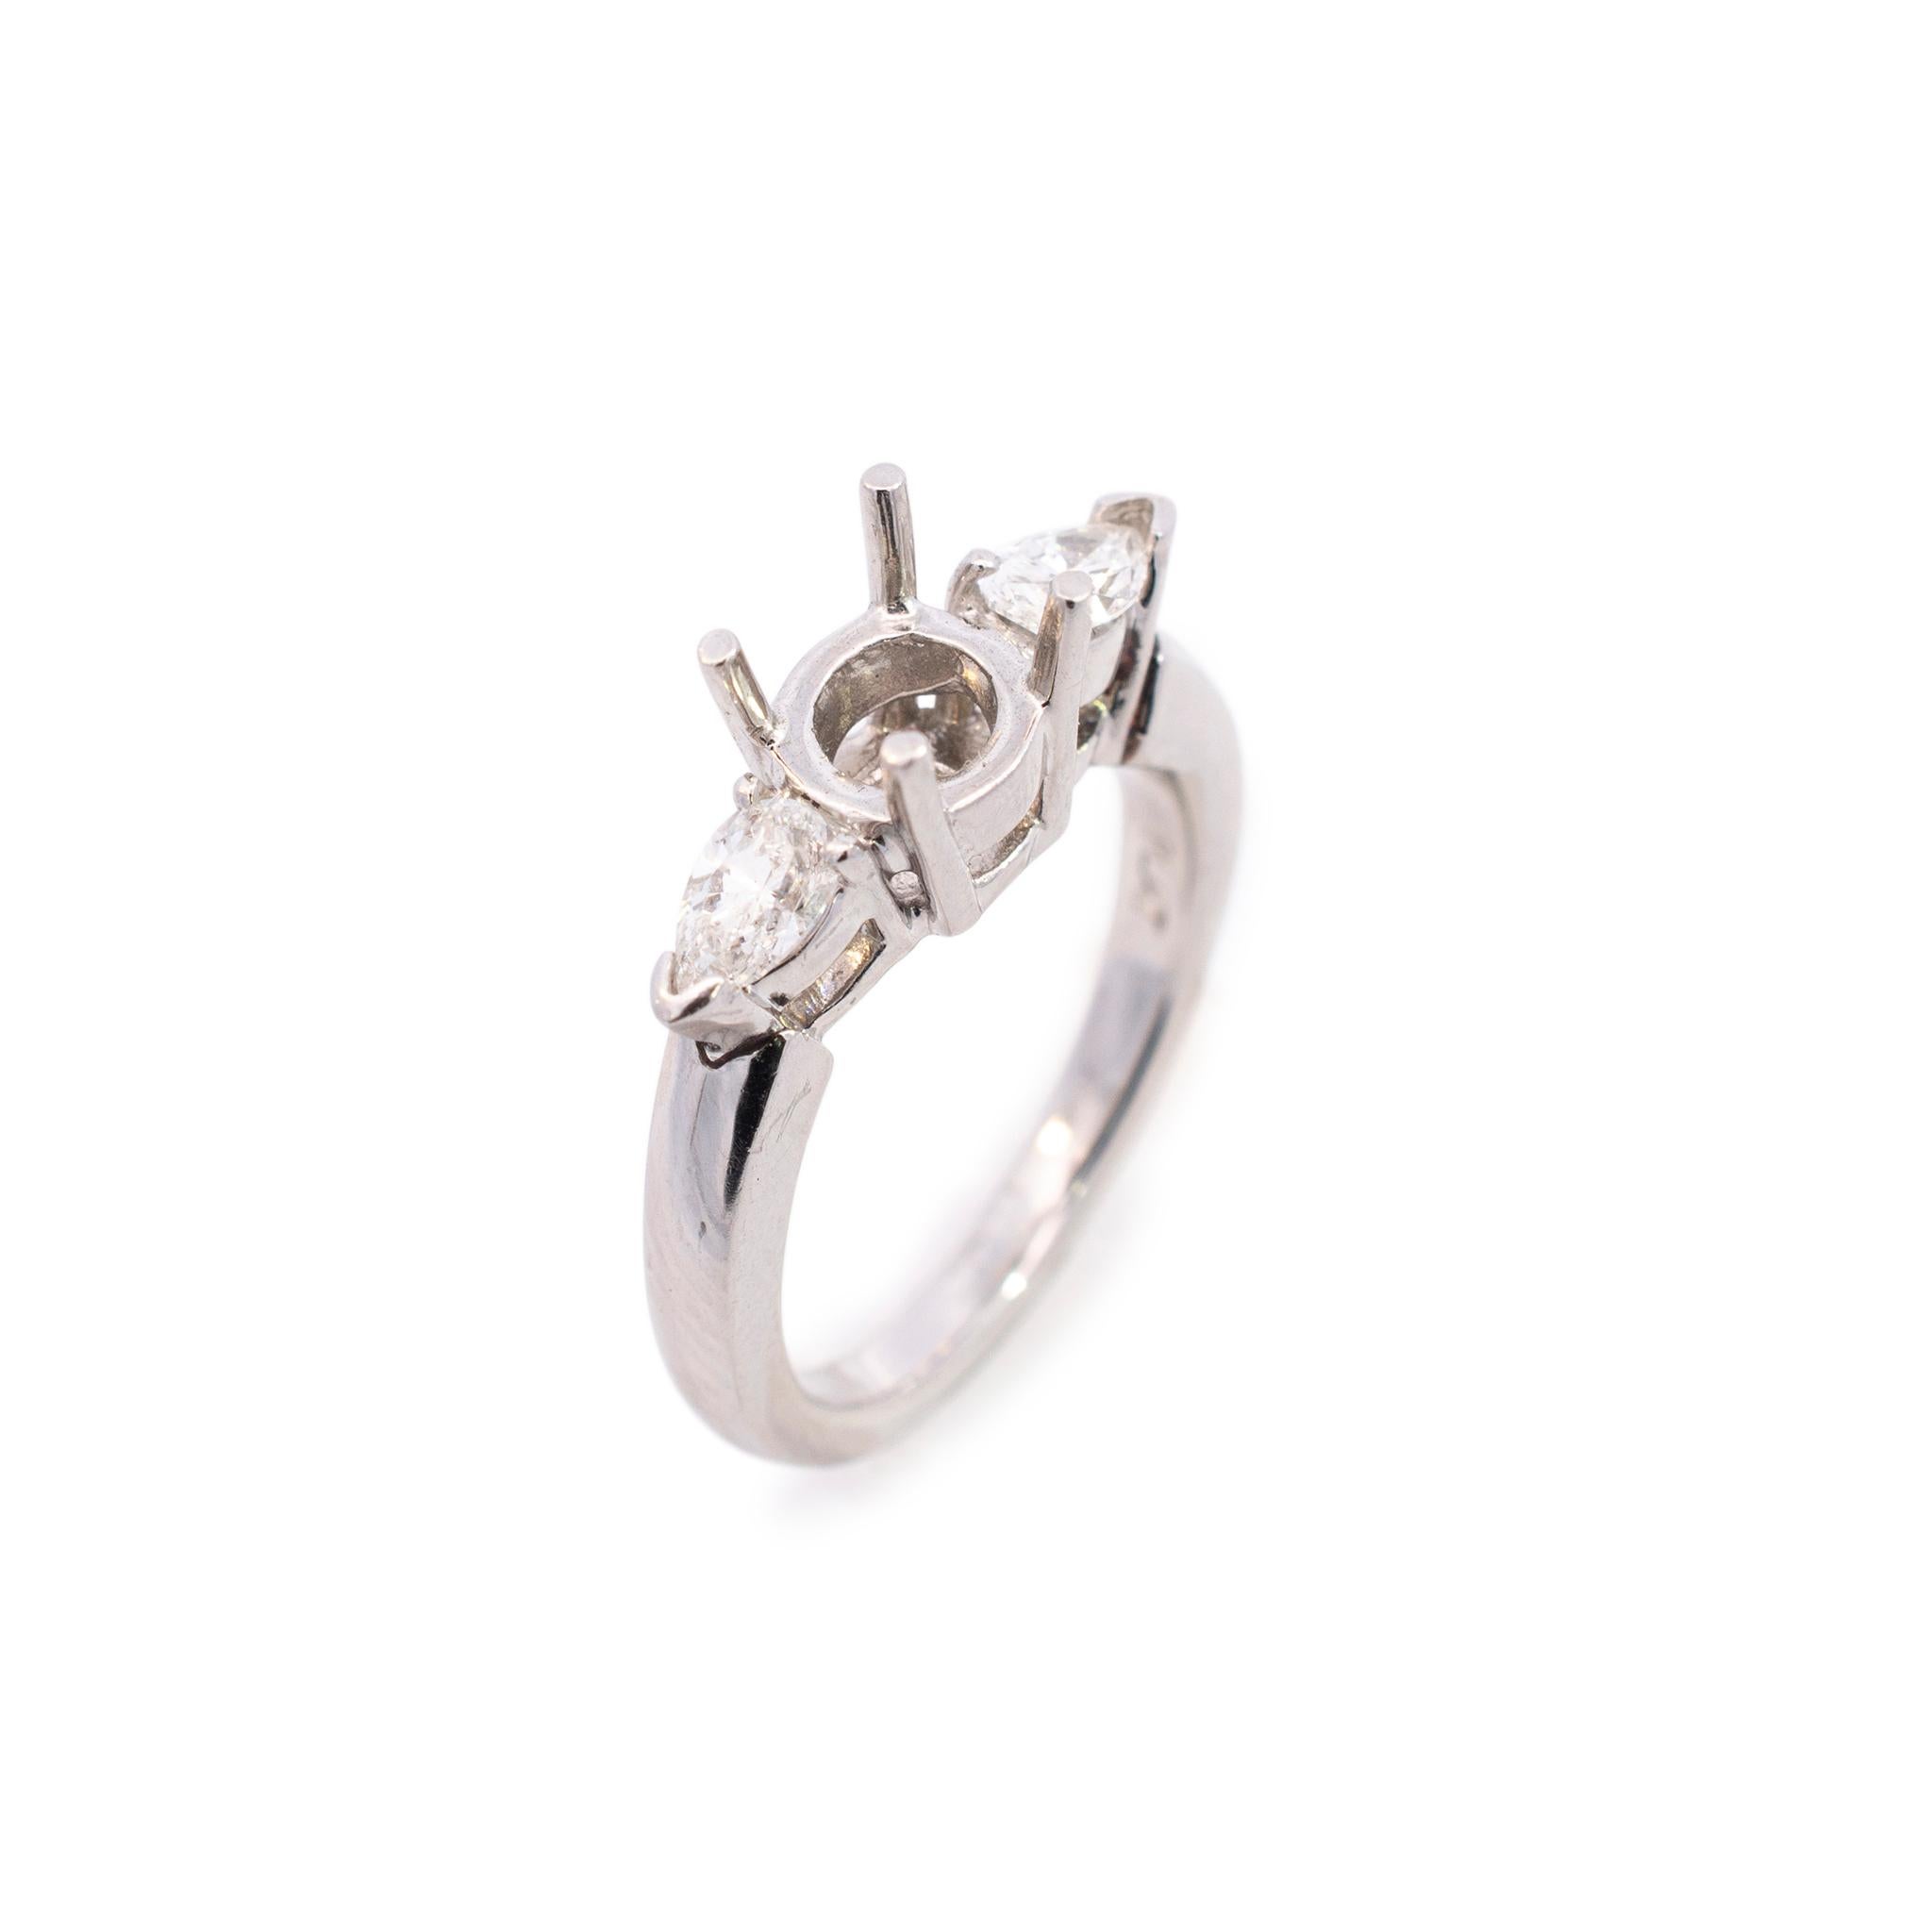 Gender: Ladies
Size: 6 US
Total Weight: 9 grams
Purity: Platinum
Shank type: Soft Square
Condition: Pre-owned in excellent condition. Quality and Durability was checked by professional jewelers.

The semi-mount can accommodate a round stone with a